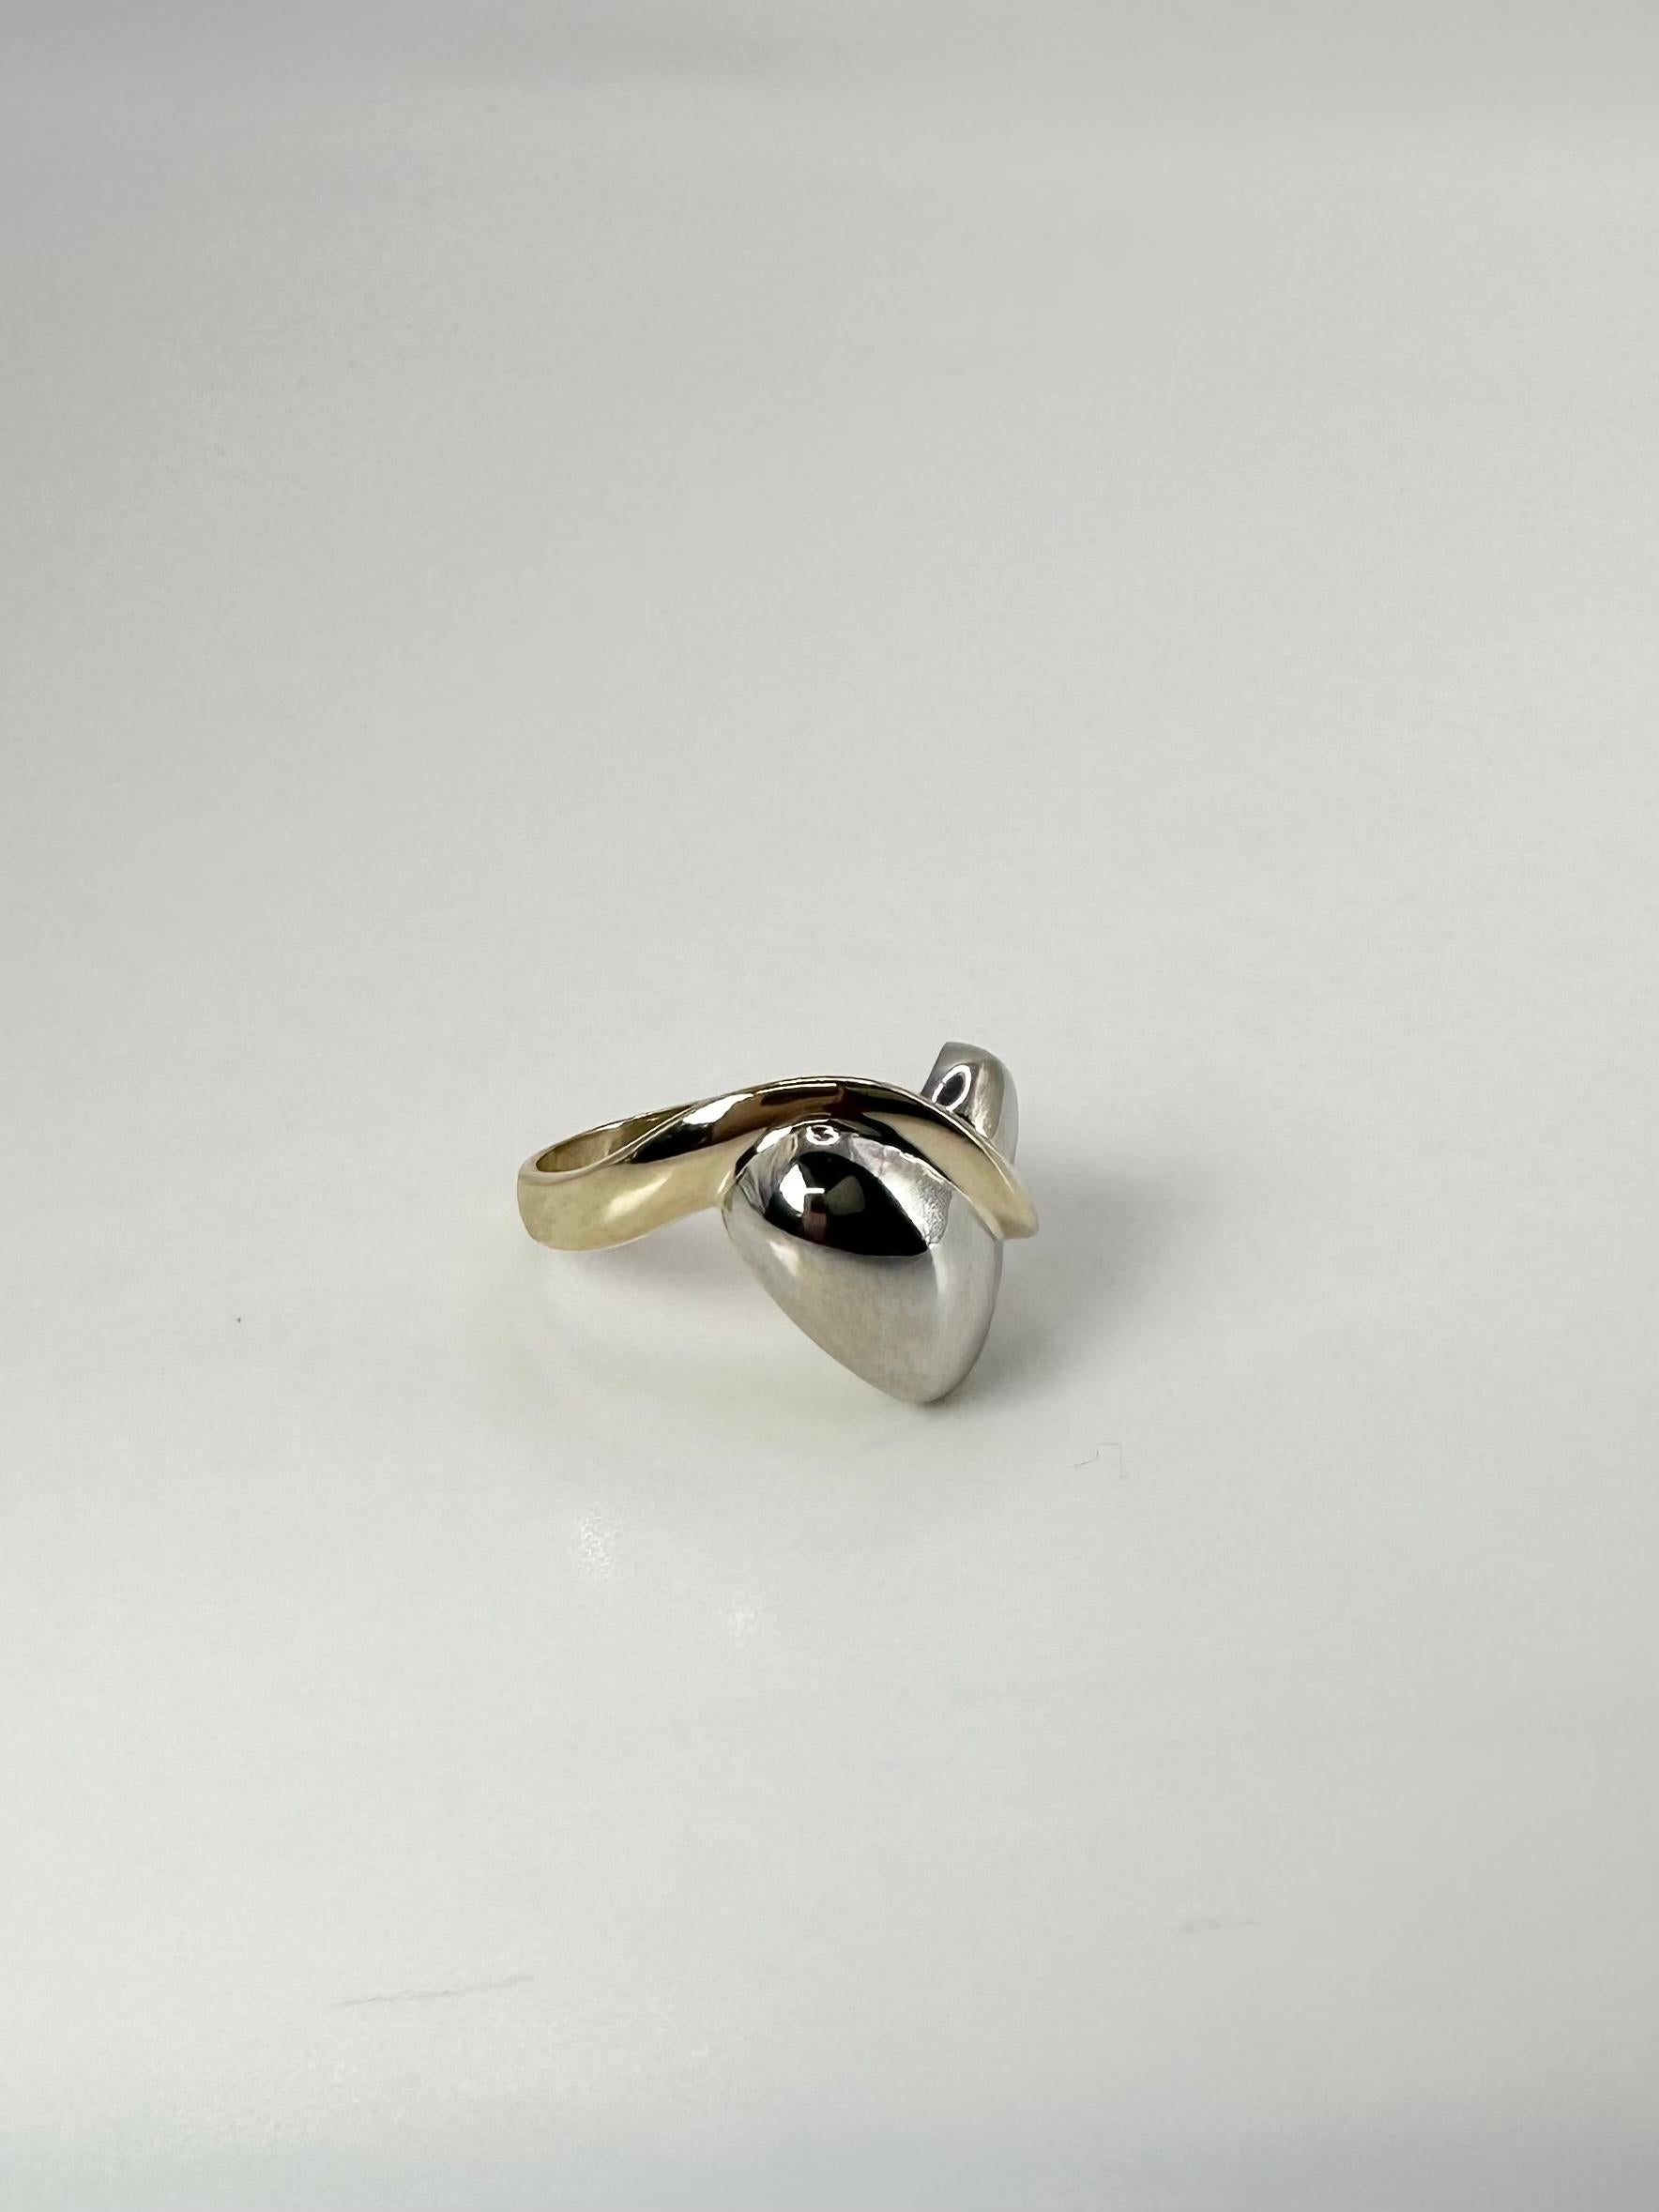 Modernist Heart Gold Ring 14 Karat Two Tone Gold Dome Cocktail Ring For Sale